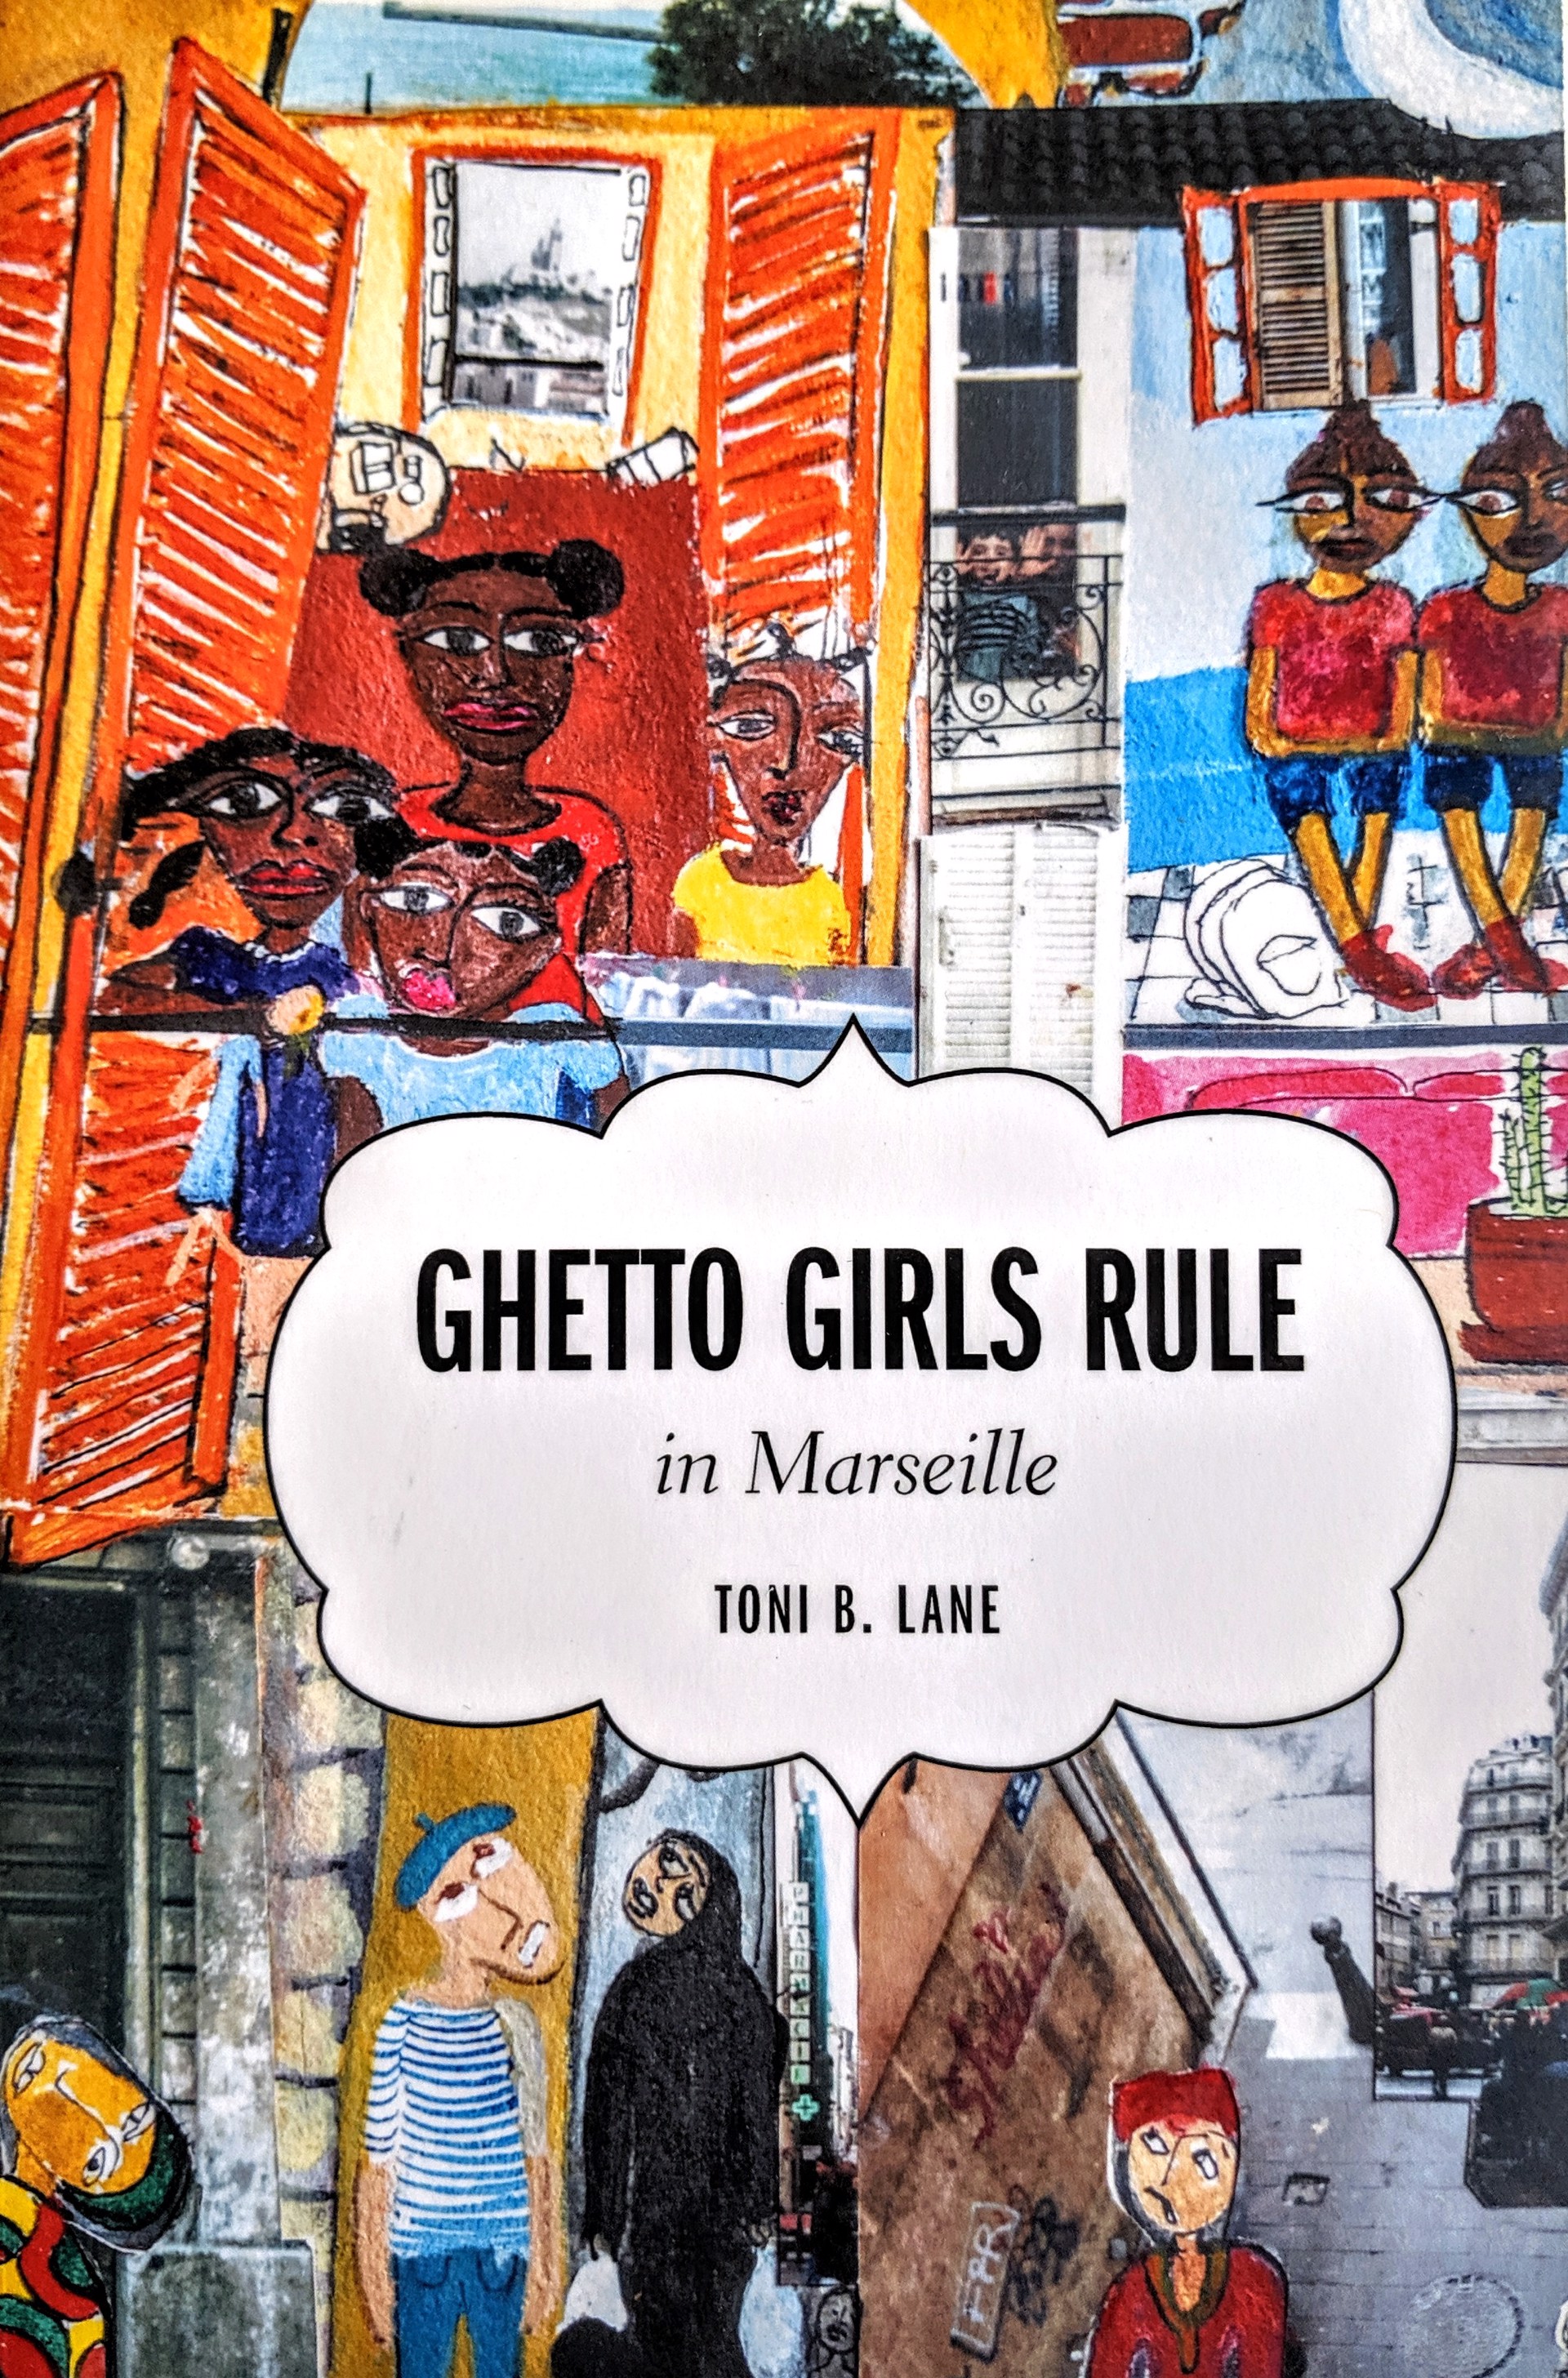 Ghetto Girls Rule in Marseille (hard copy) by Toni Lane